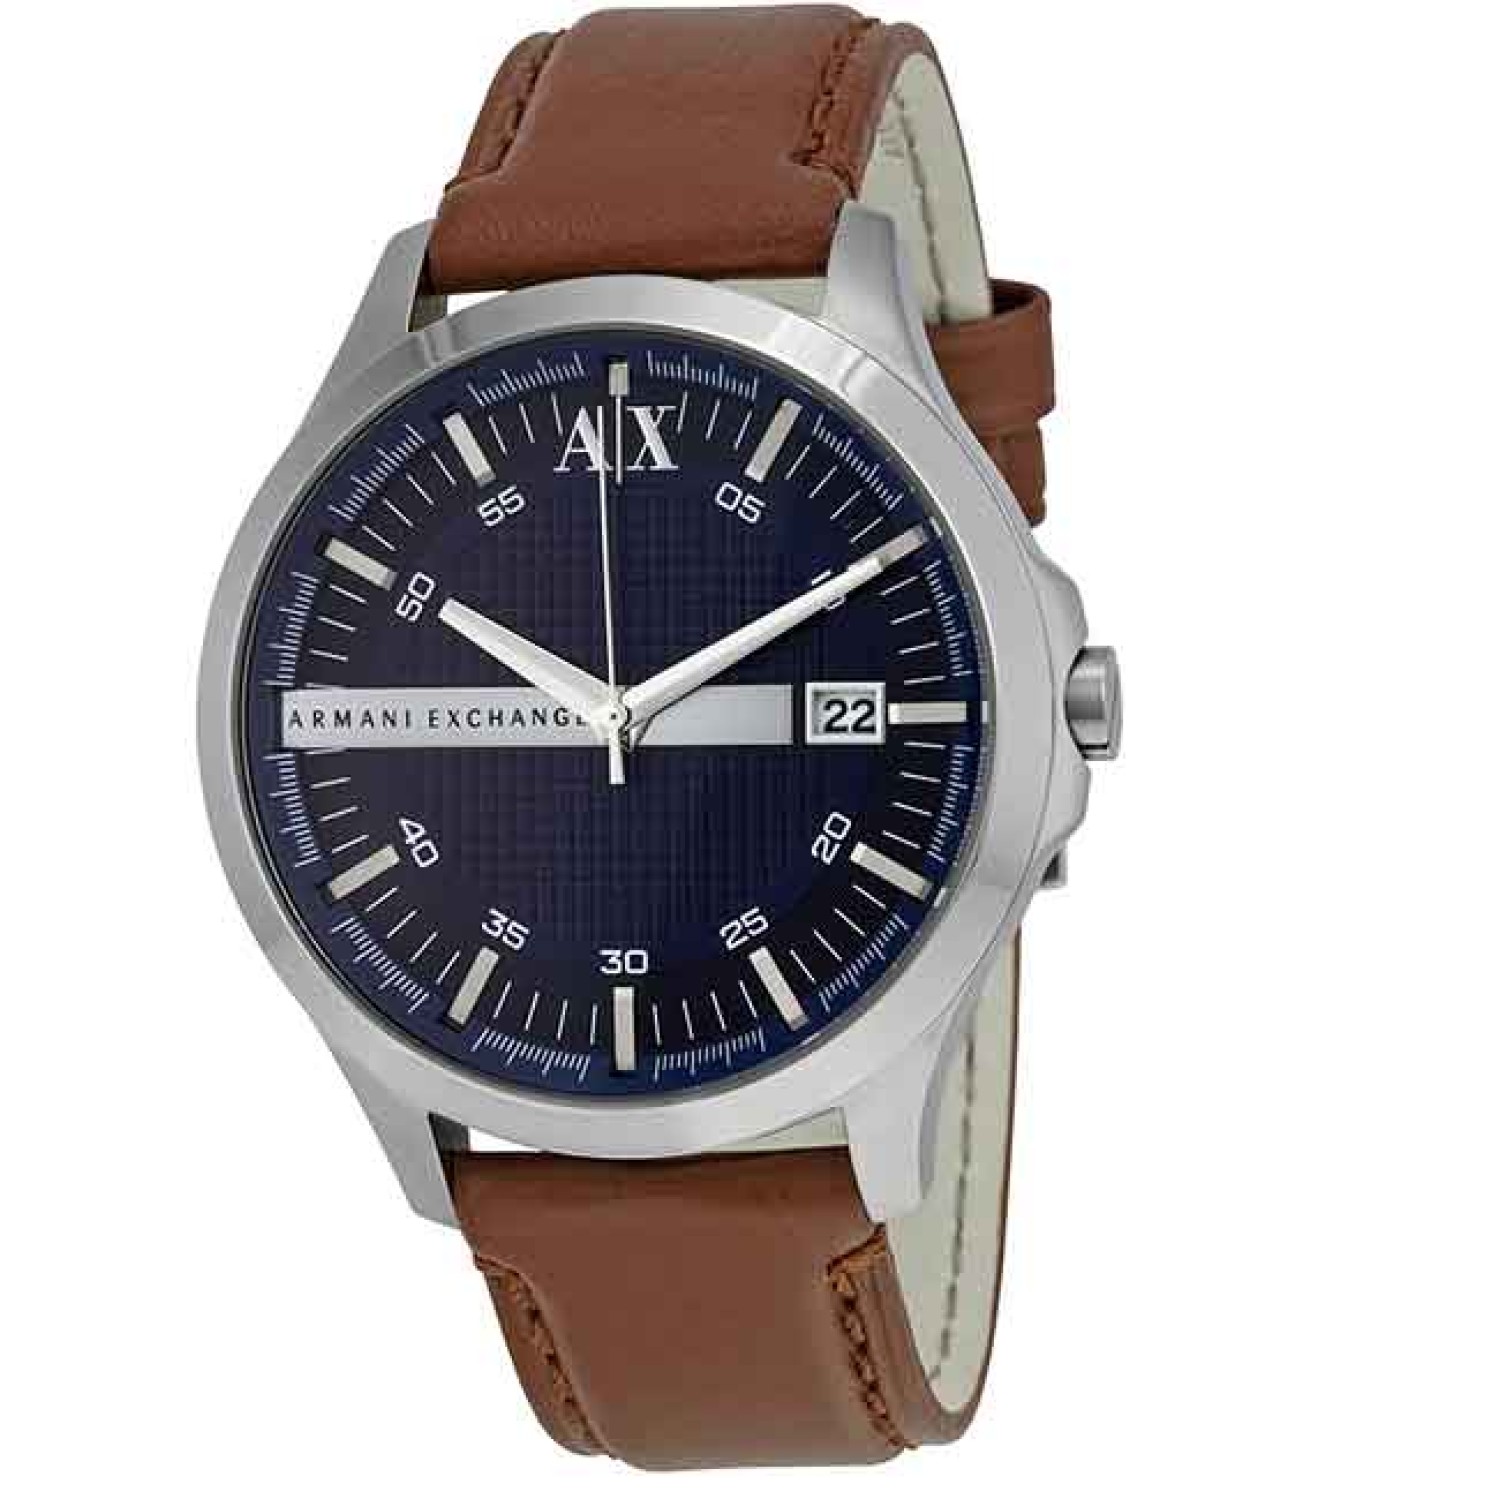 AX2133 A|X Armani Exchange. This Armani Exchange Hampton AX2133 watch is sleek and stylish and has a stainless steel case and is powered by an analogue quartz movement. It is fitted with a brown leather strap and has a blue dial emporio armani watches auc